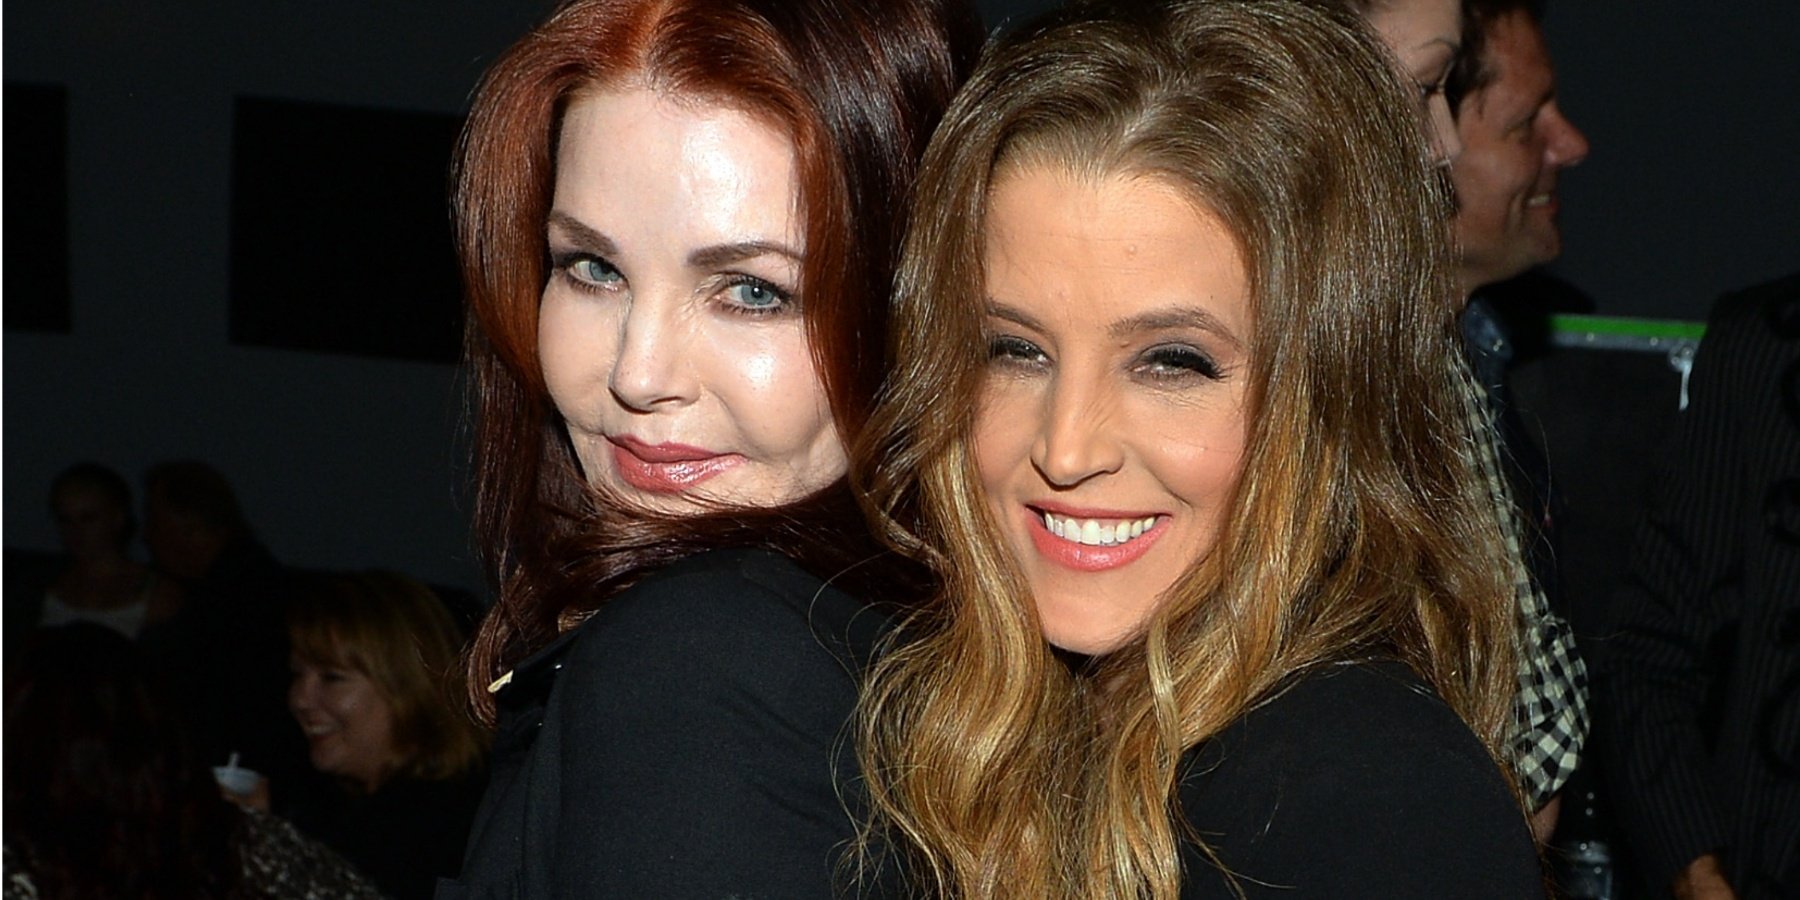 Priscilla Presley and Lisa Marie Presley photographed at the 14th Annual Americana Music Festival & Conference on September 20, 2013 in Nashville, TN.